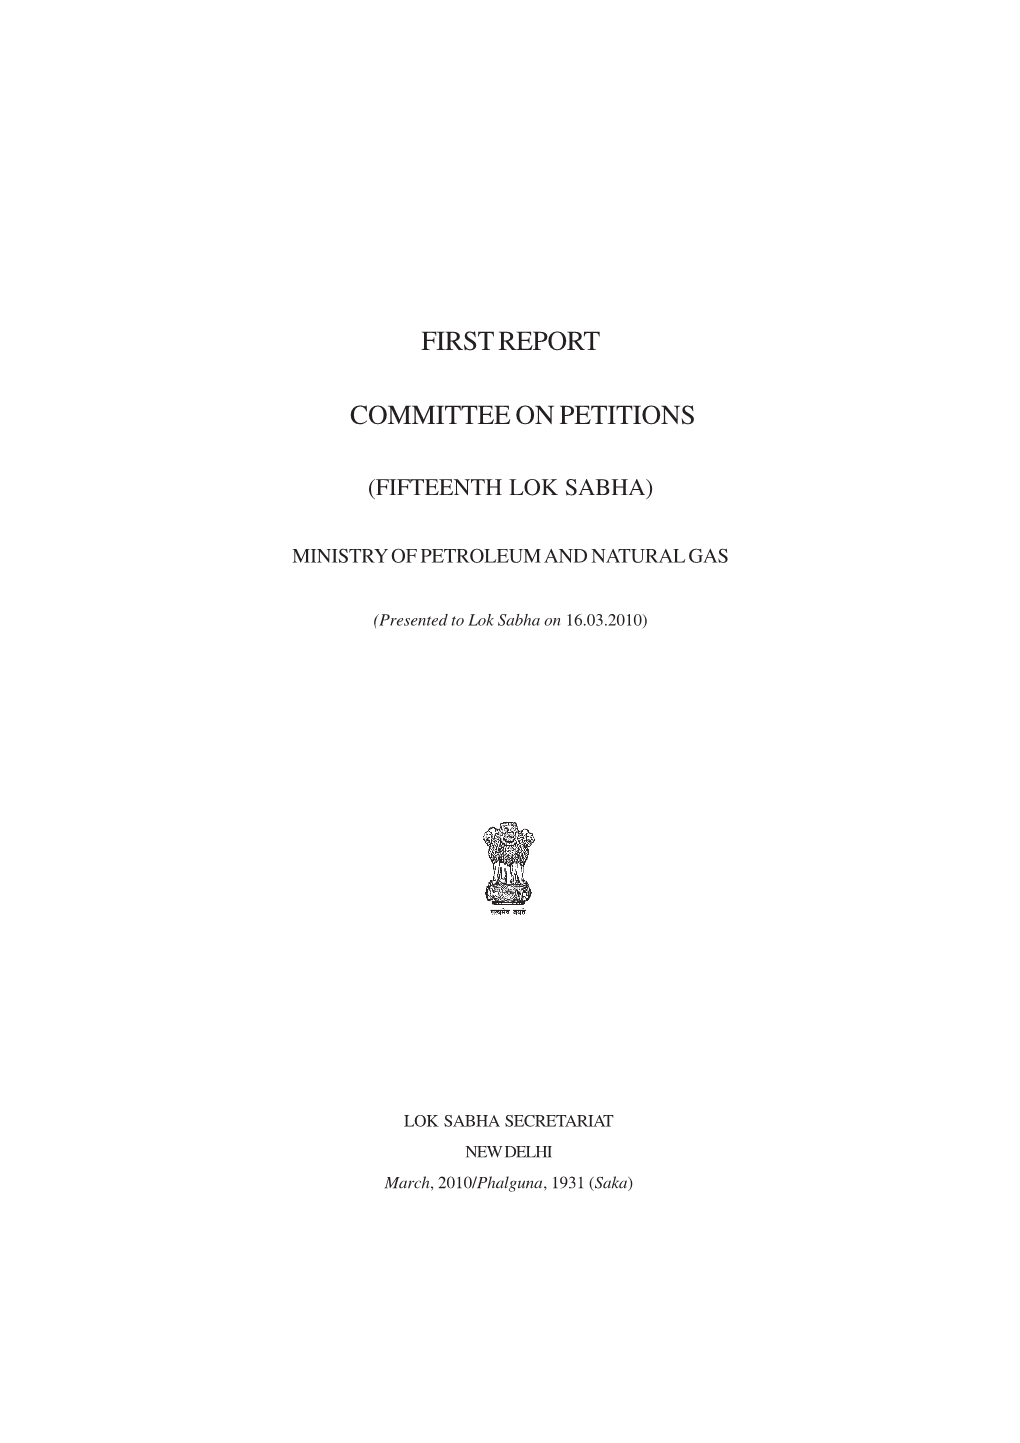 First Report Committee on Petitions